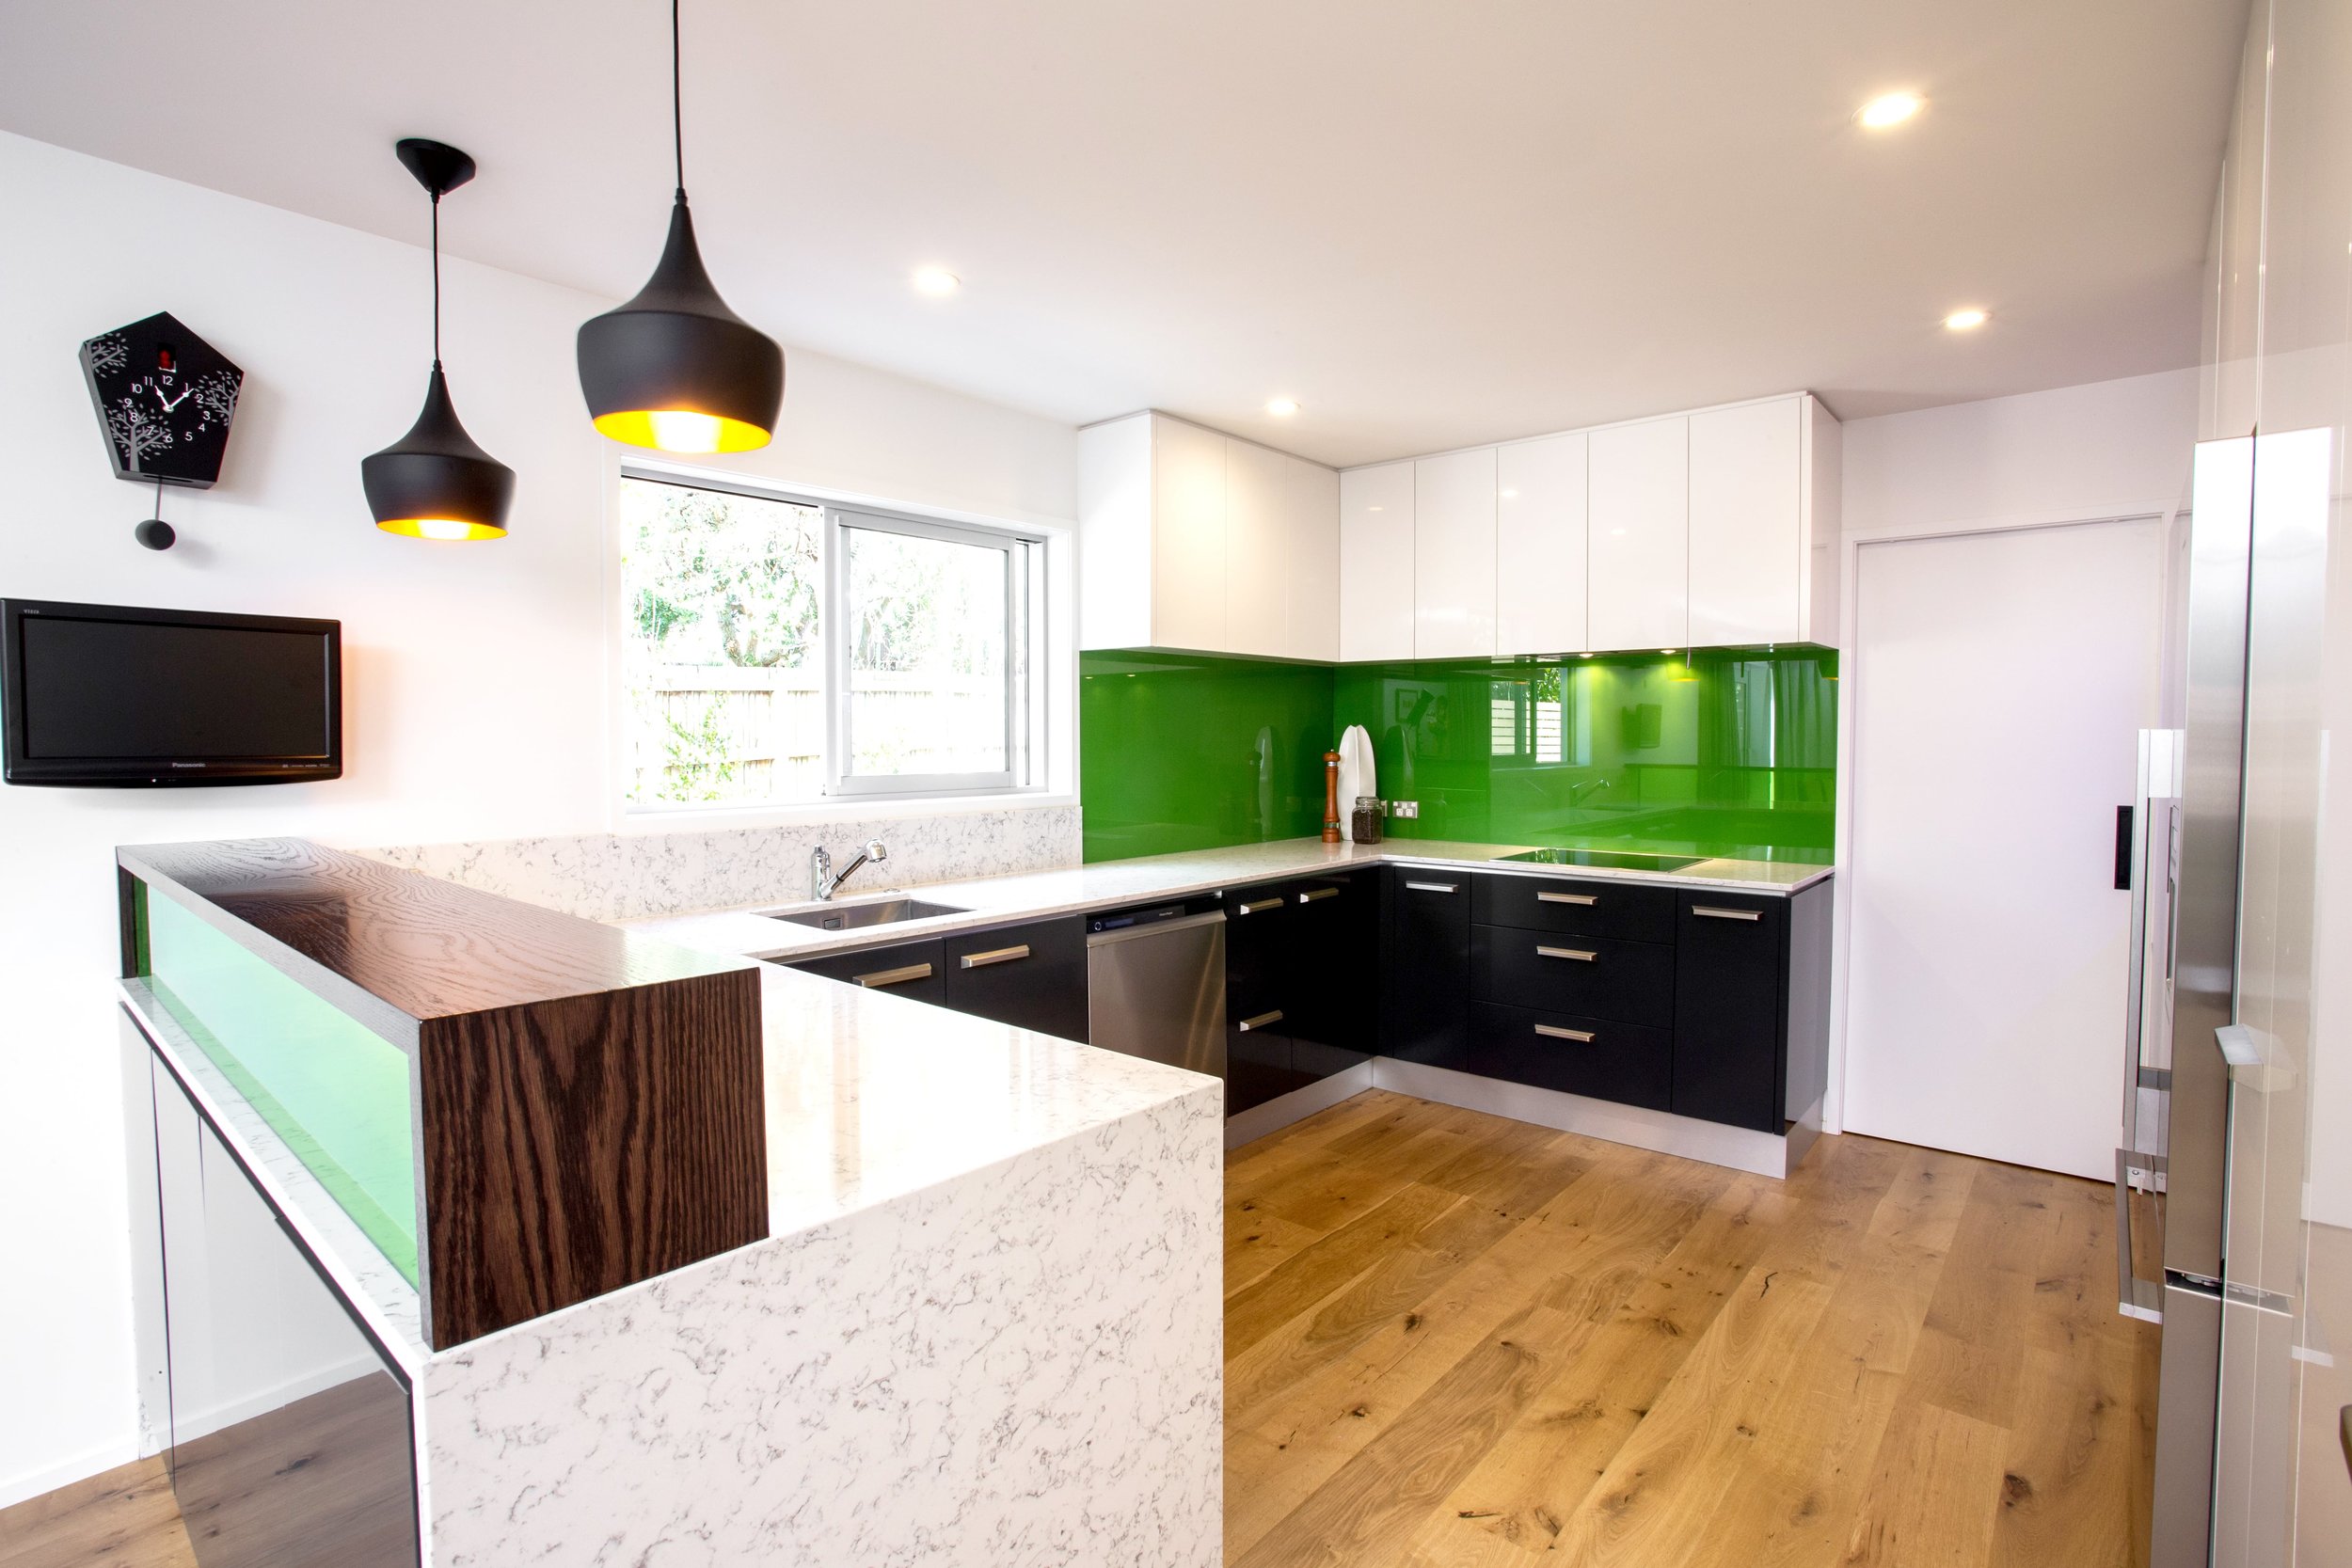 Kitchen with light-dark cabinetry with feature green glass splashback